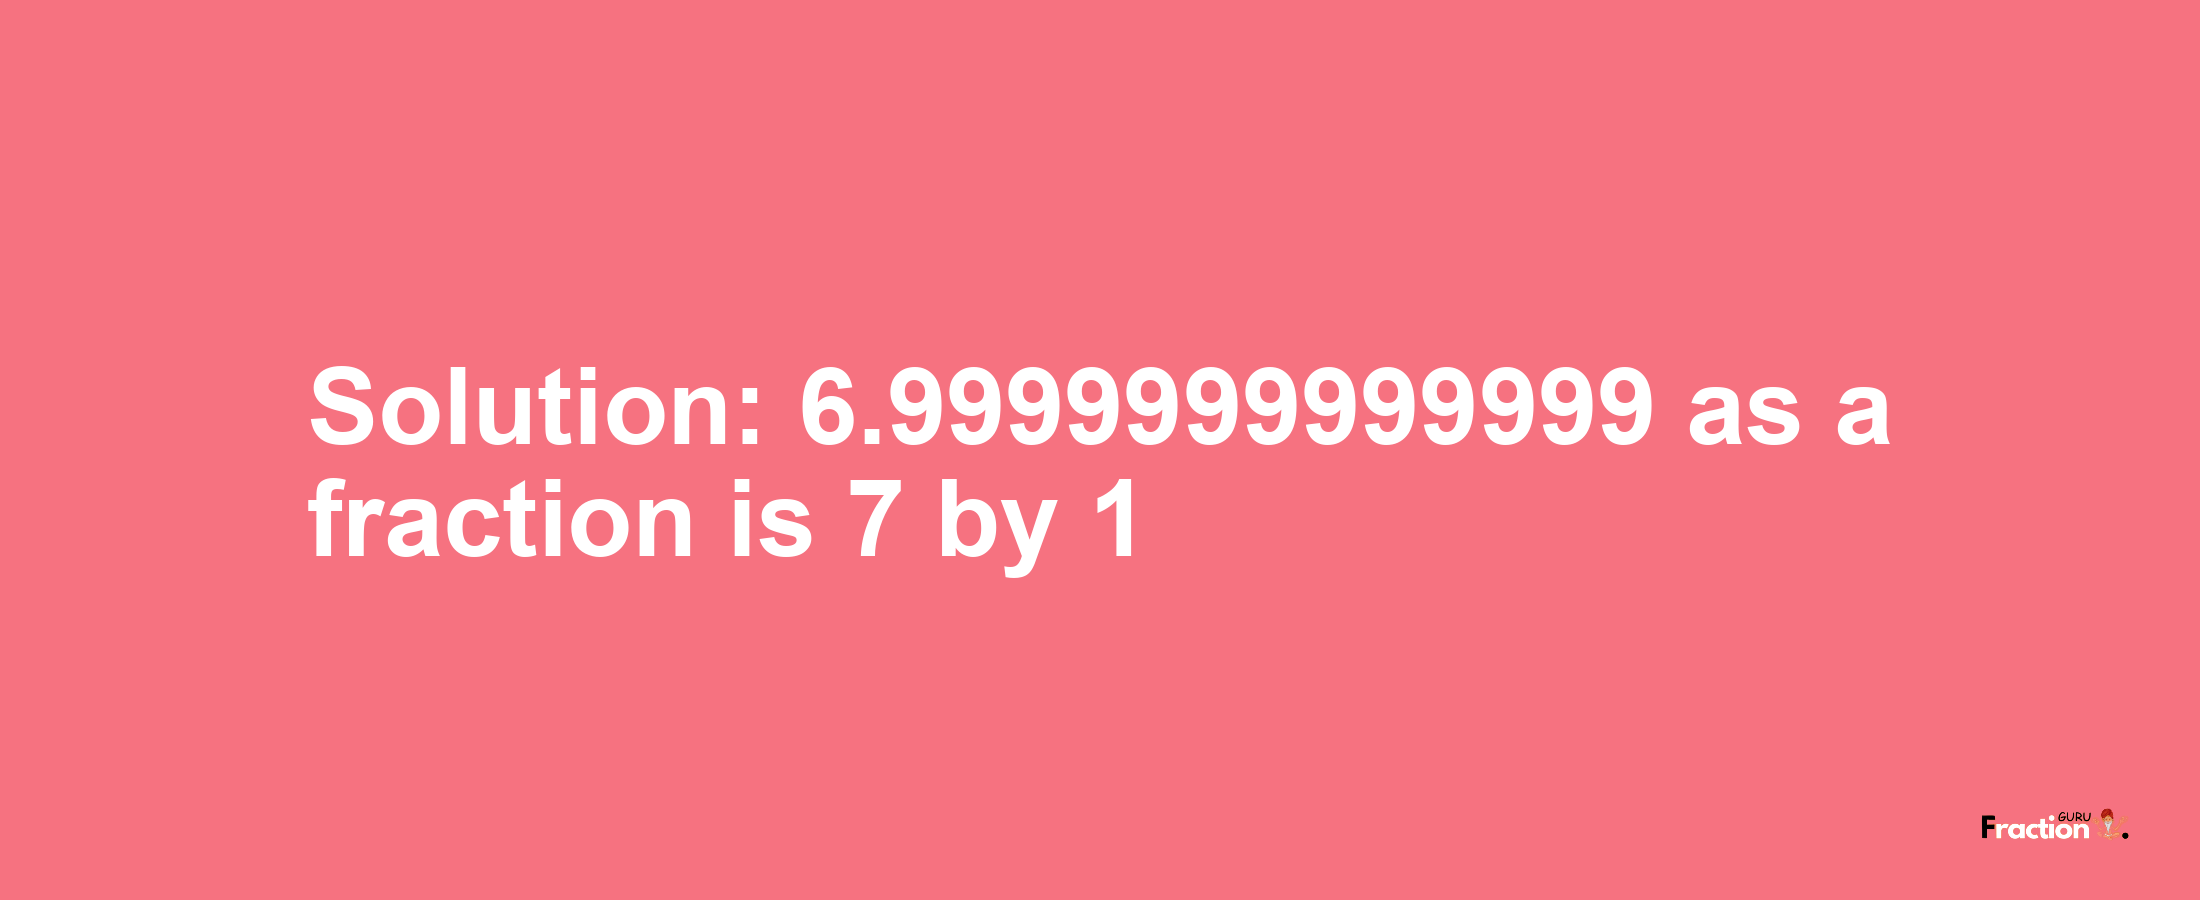 Solution:6.9999999999999 as a fraction is 7/1